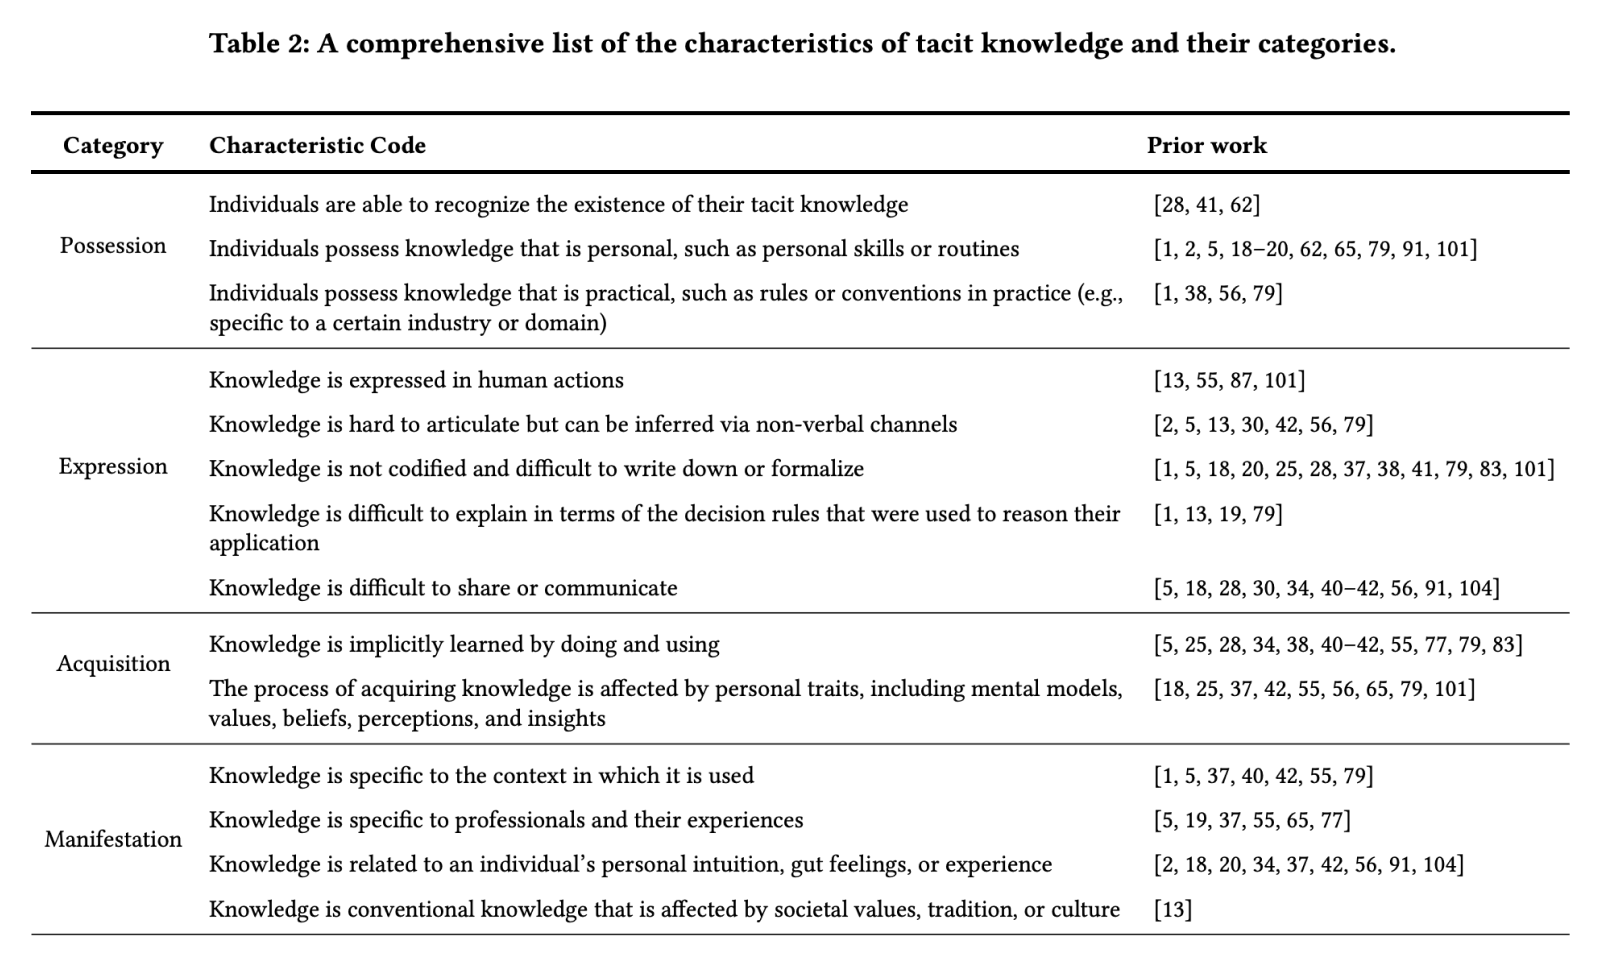 A table shows the result of the literature review on tacit knowledge. The category characteristics and paper of the tacit knowledge are illustrated. There are four categories, and 14 characteristic codes are shown in the table. In category, possession, expression, acquisition, and manifestation exist.